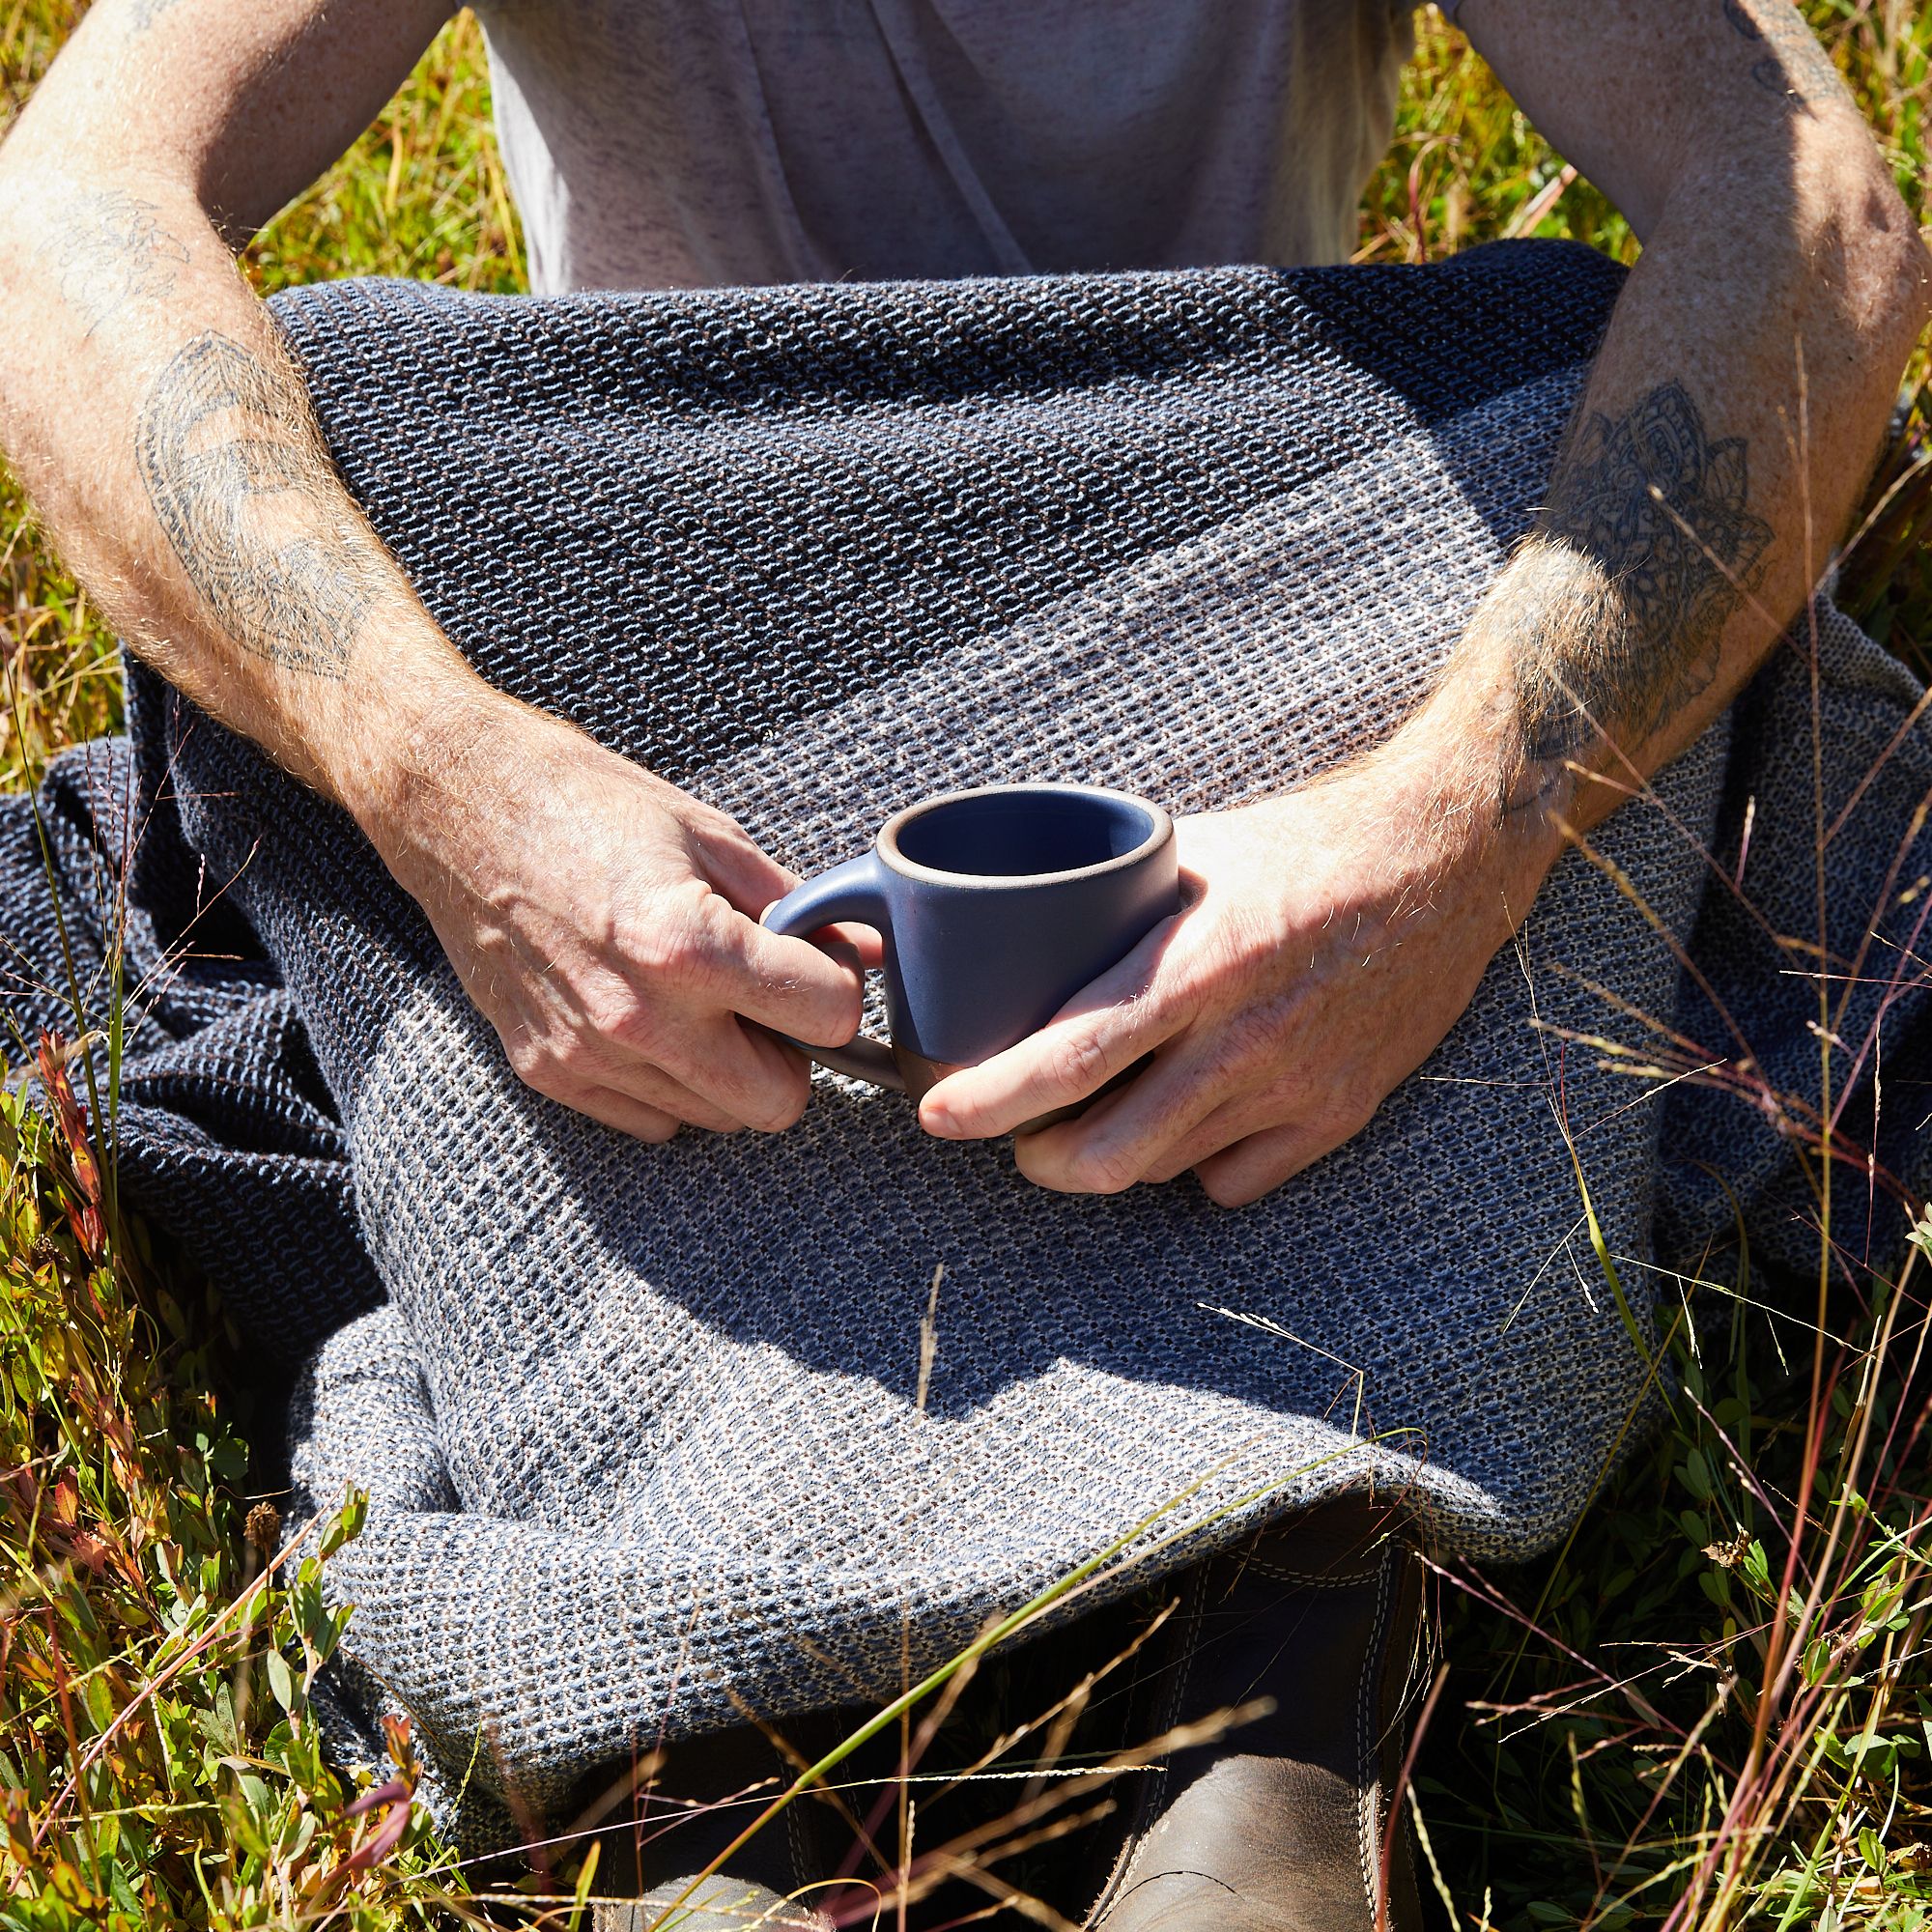 A person with a blanket over their lap, shown chest to feet, sitting in tall grass holding a blue small mug with both hands in front of them